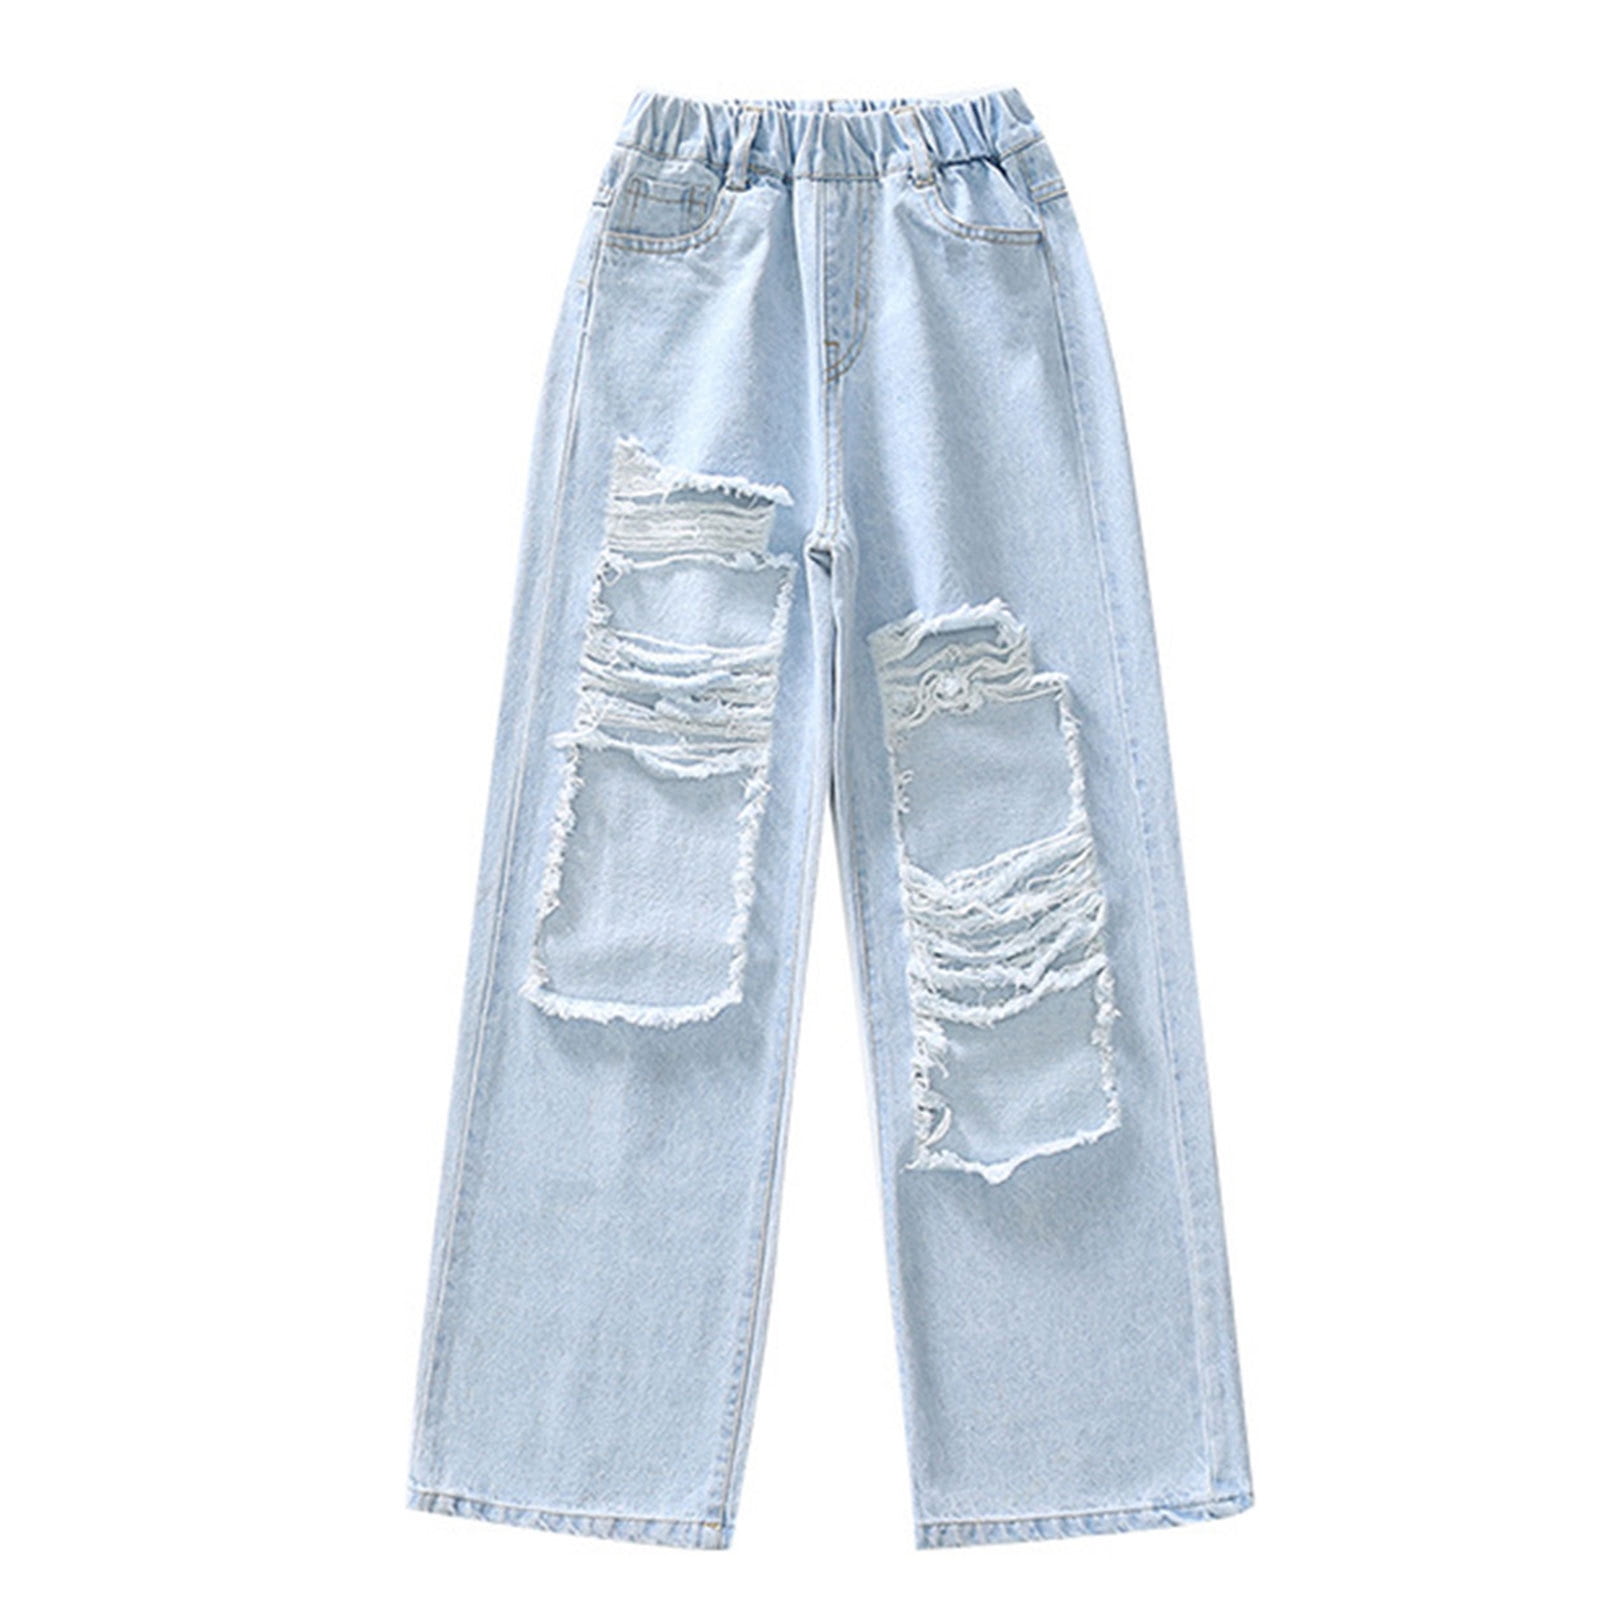 DPOIS Kids High Waisted Jeans Girls Casual Loose Fit Distressed Denim Pants Blue 4-5 - Walmart.com